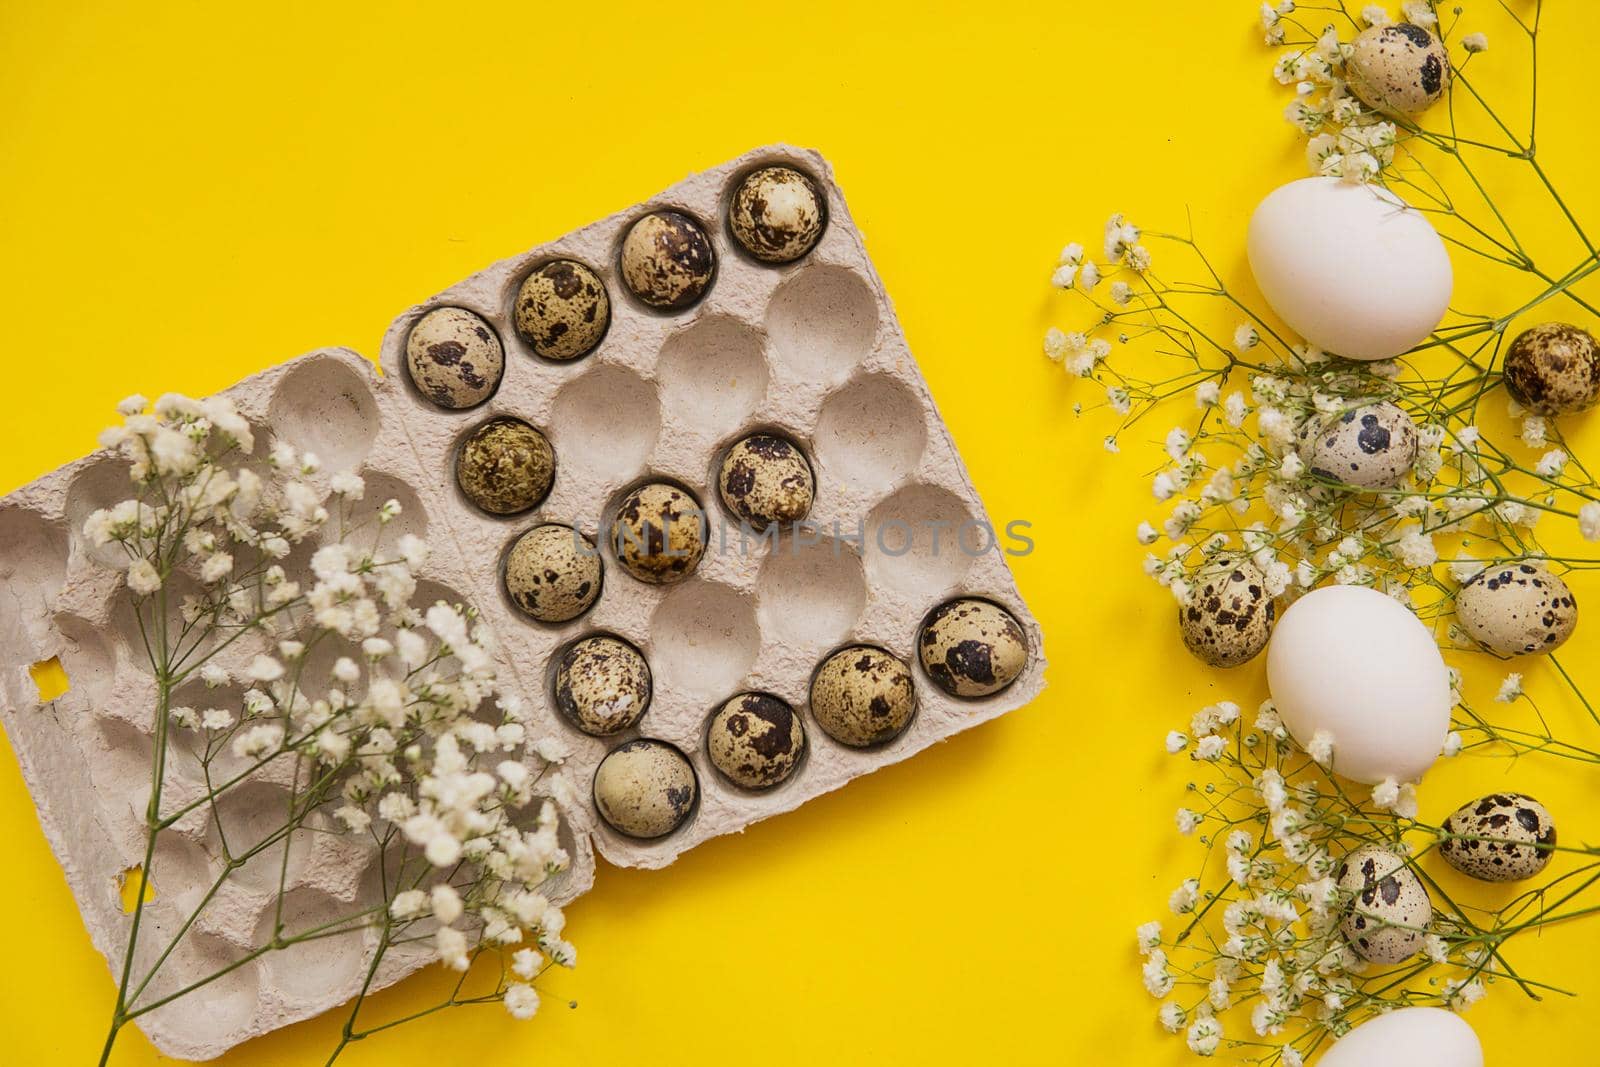 Easter background, various eggs on a yellow background, decorated with natural botanical elements, flat lay, view from above, empty space for text by Annu1tochka